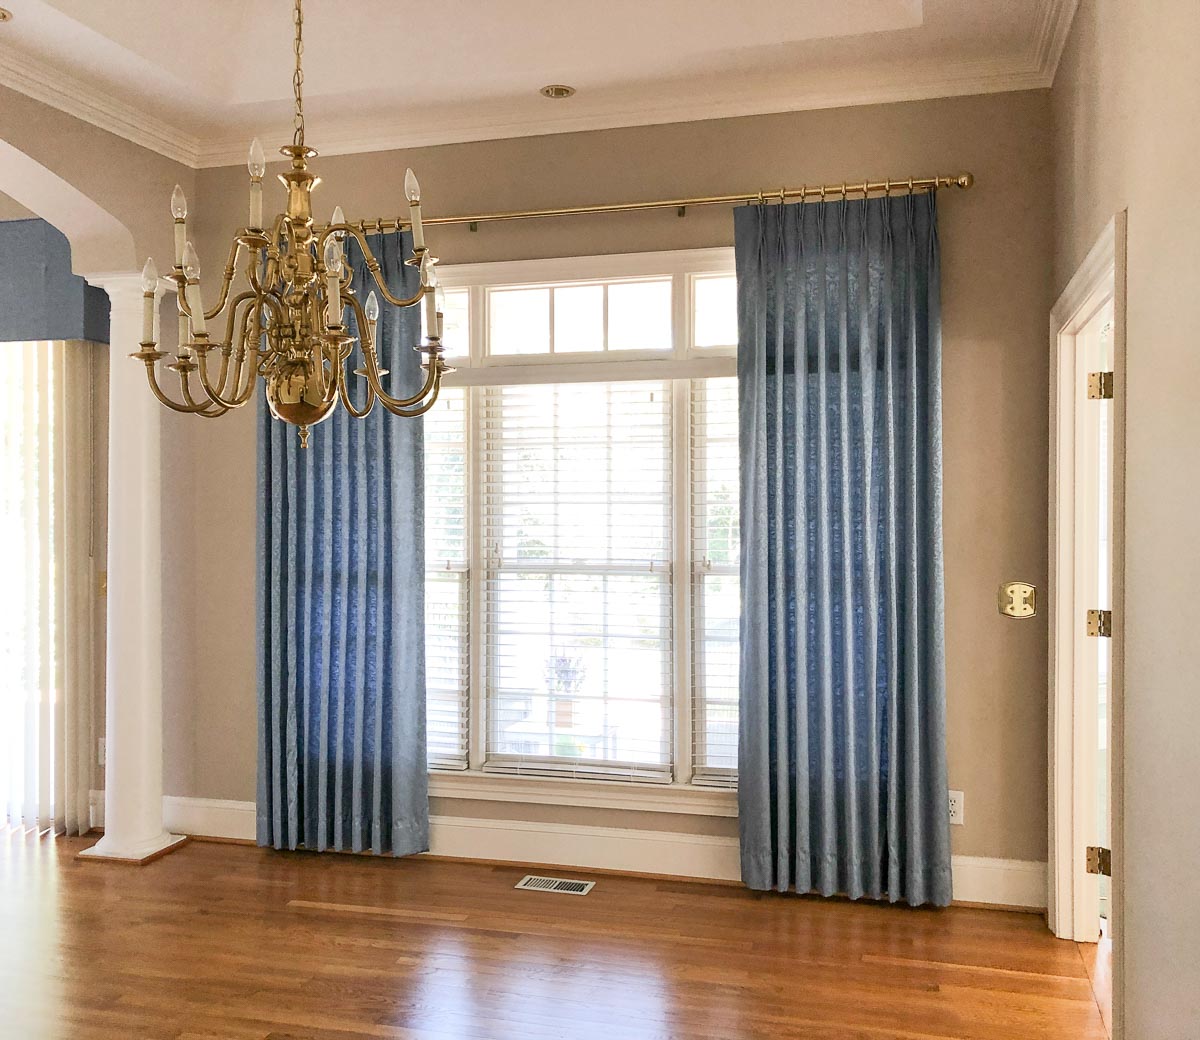 Drapes hung too low and not wide enough on window